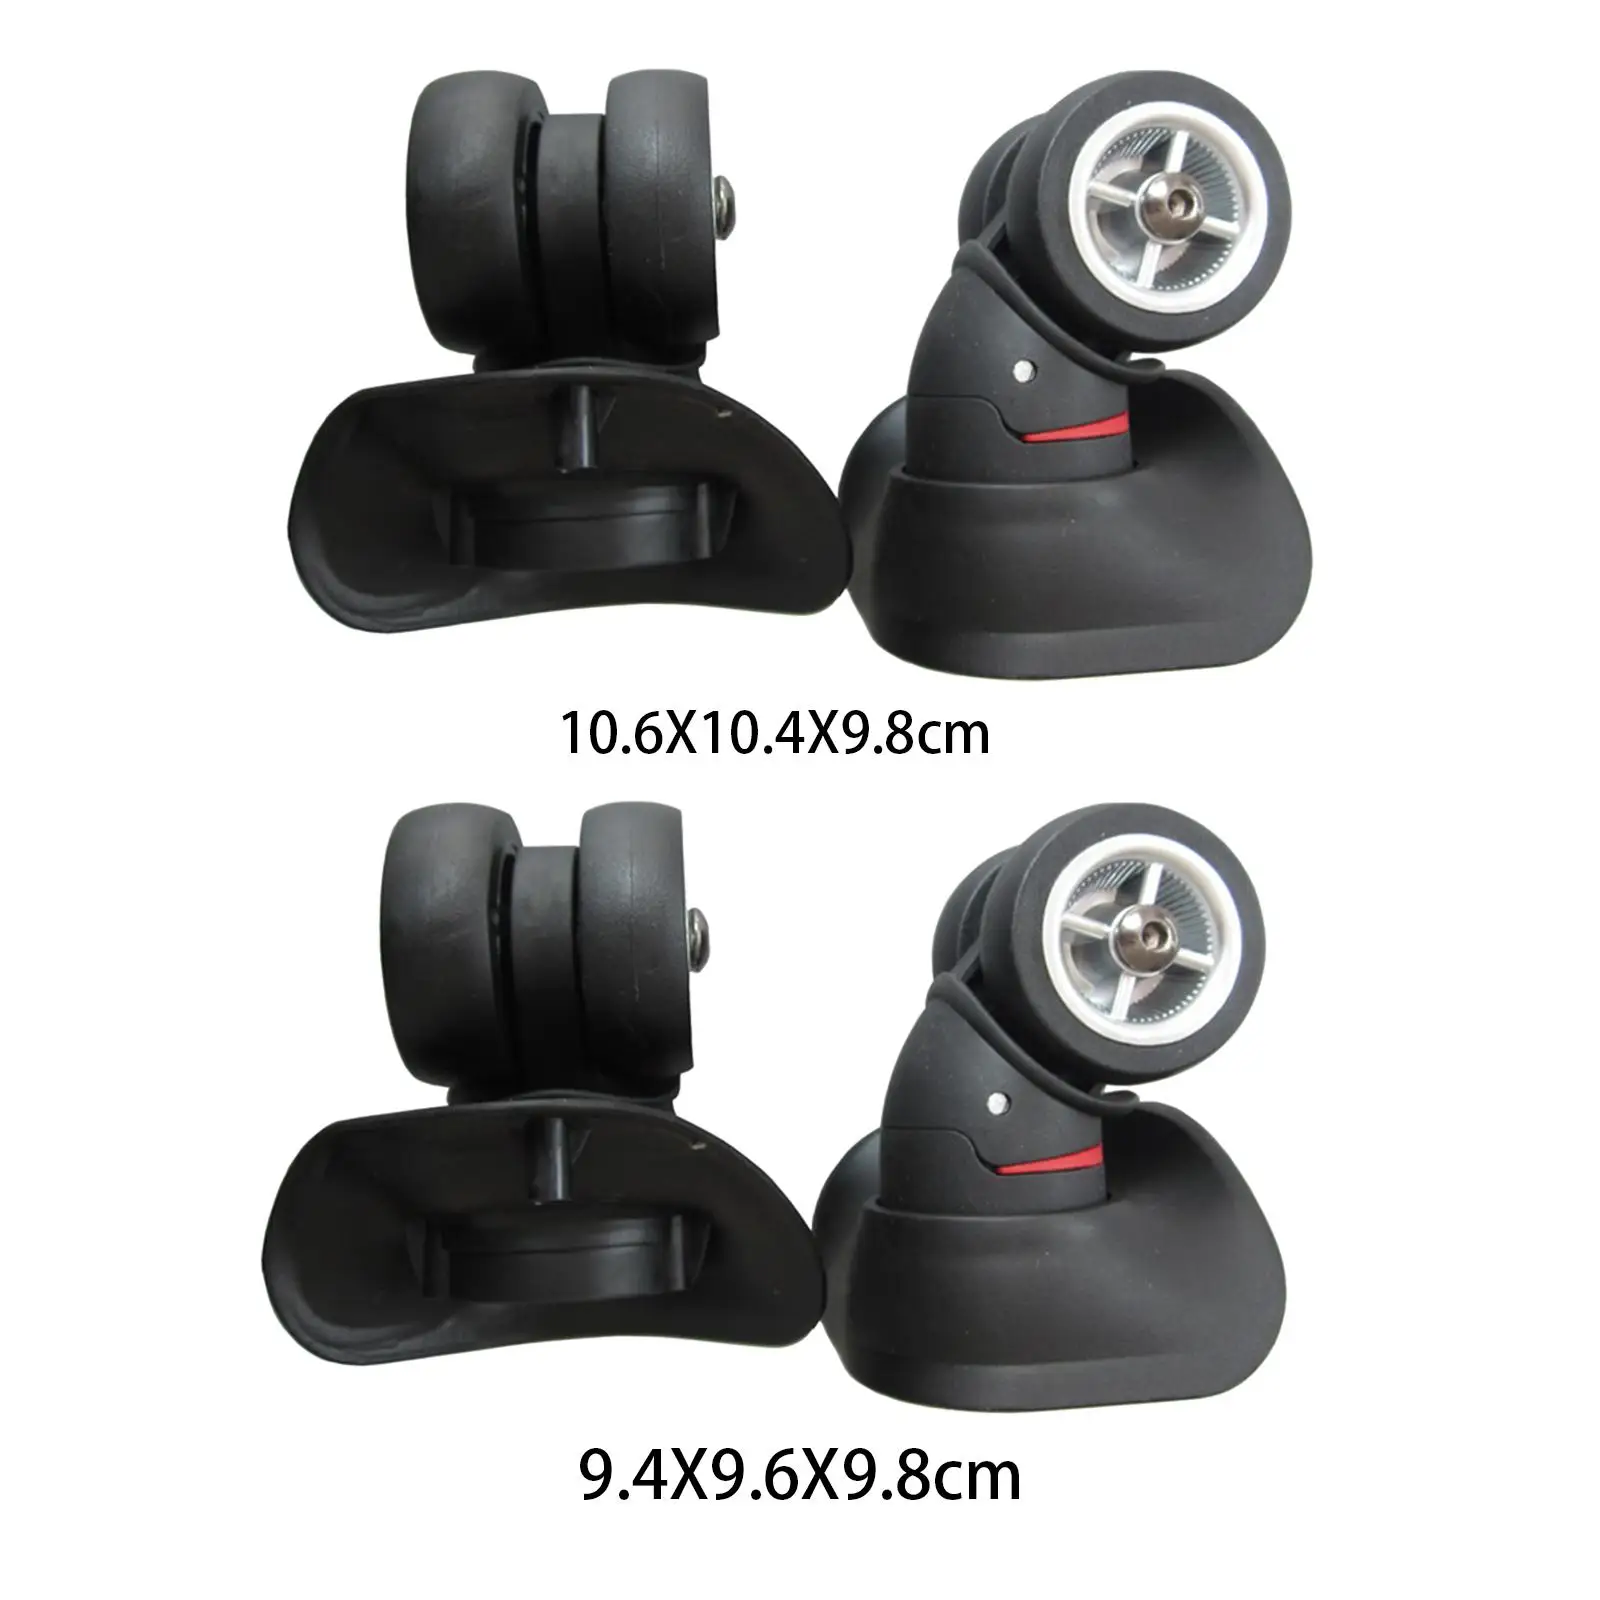 A08 Luggage Wheel Replacement Universal Swivel Casters Travel Suitcase Wheels Luggage Mute Wheel for Luggage Box Travelling Bag